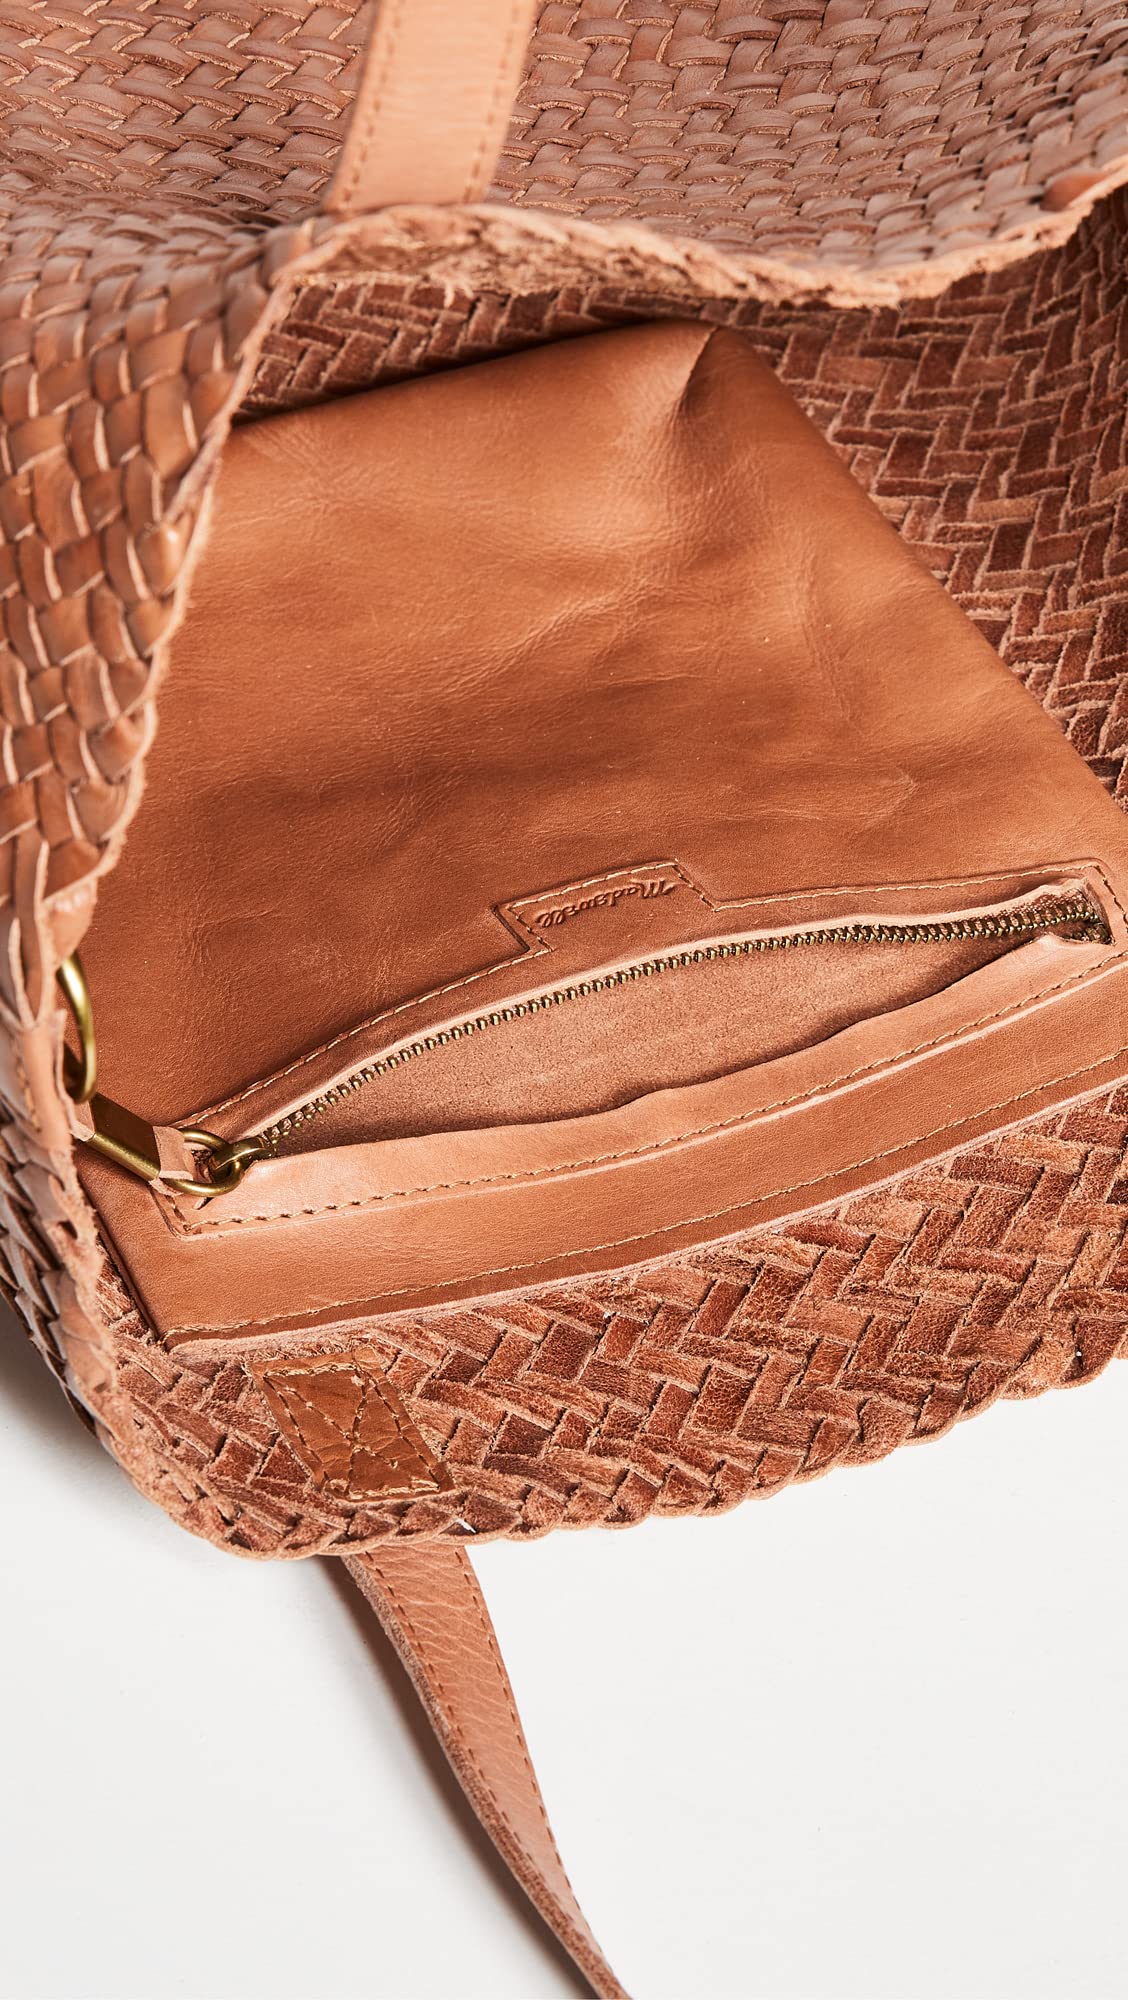 The Medium Transport Tote: Woven Leather Edition